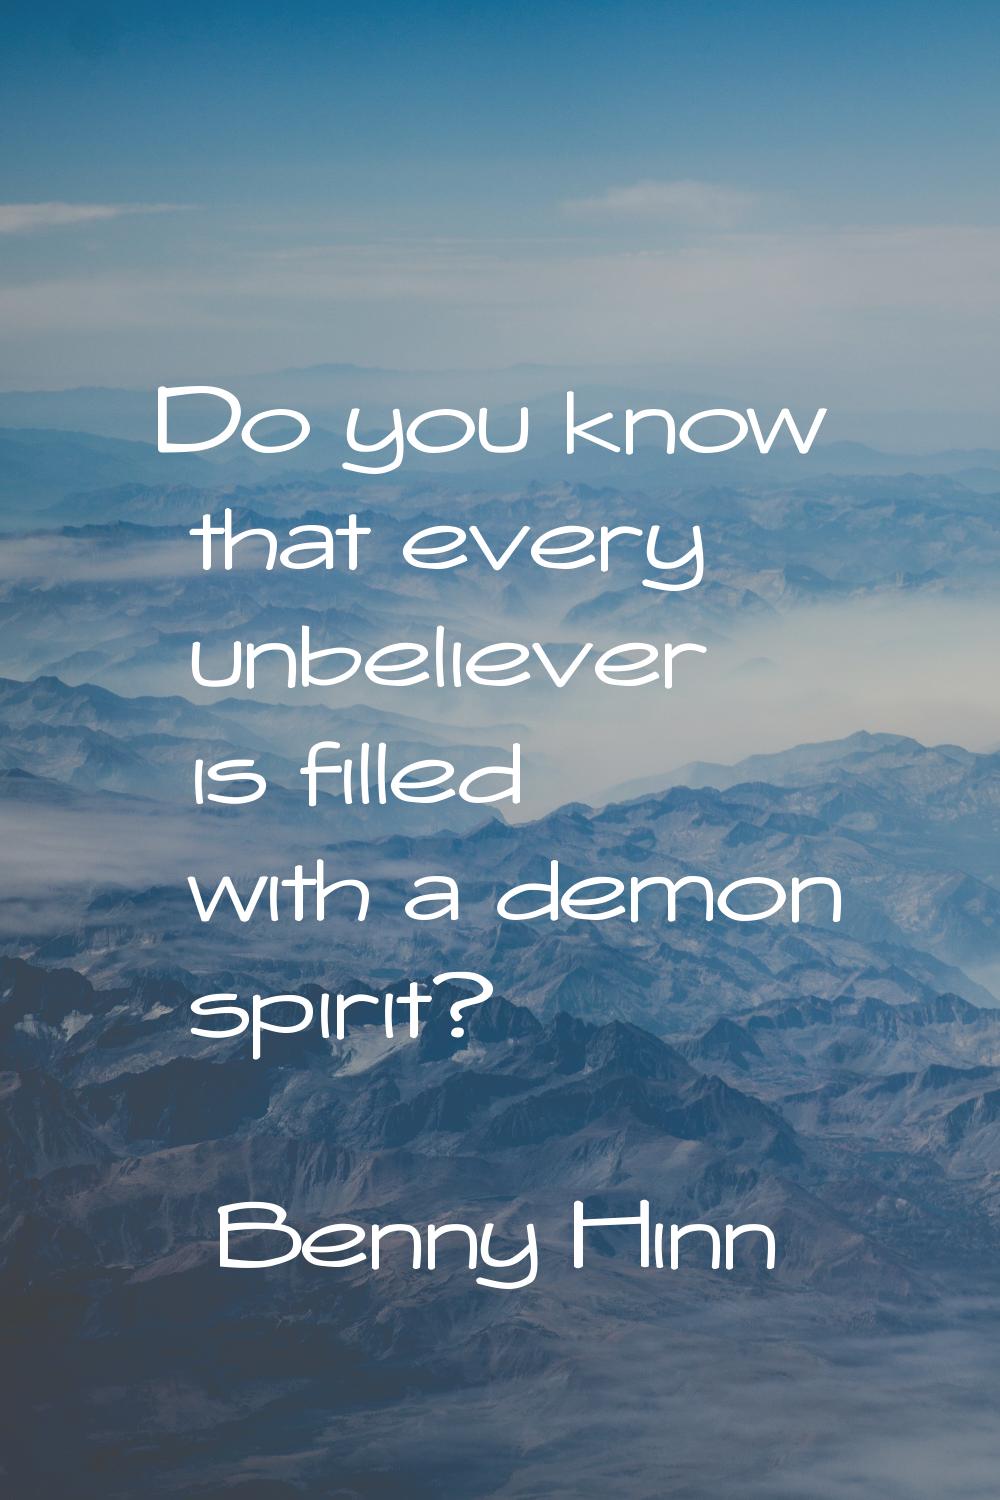 Do you know that every unbeliever is filled with a demon spirit?